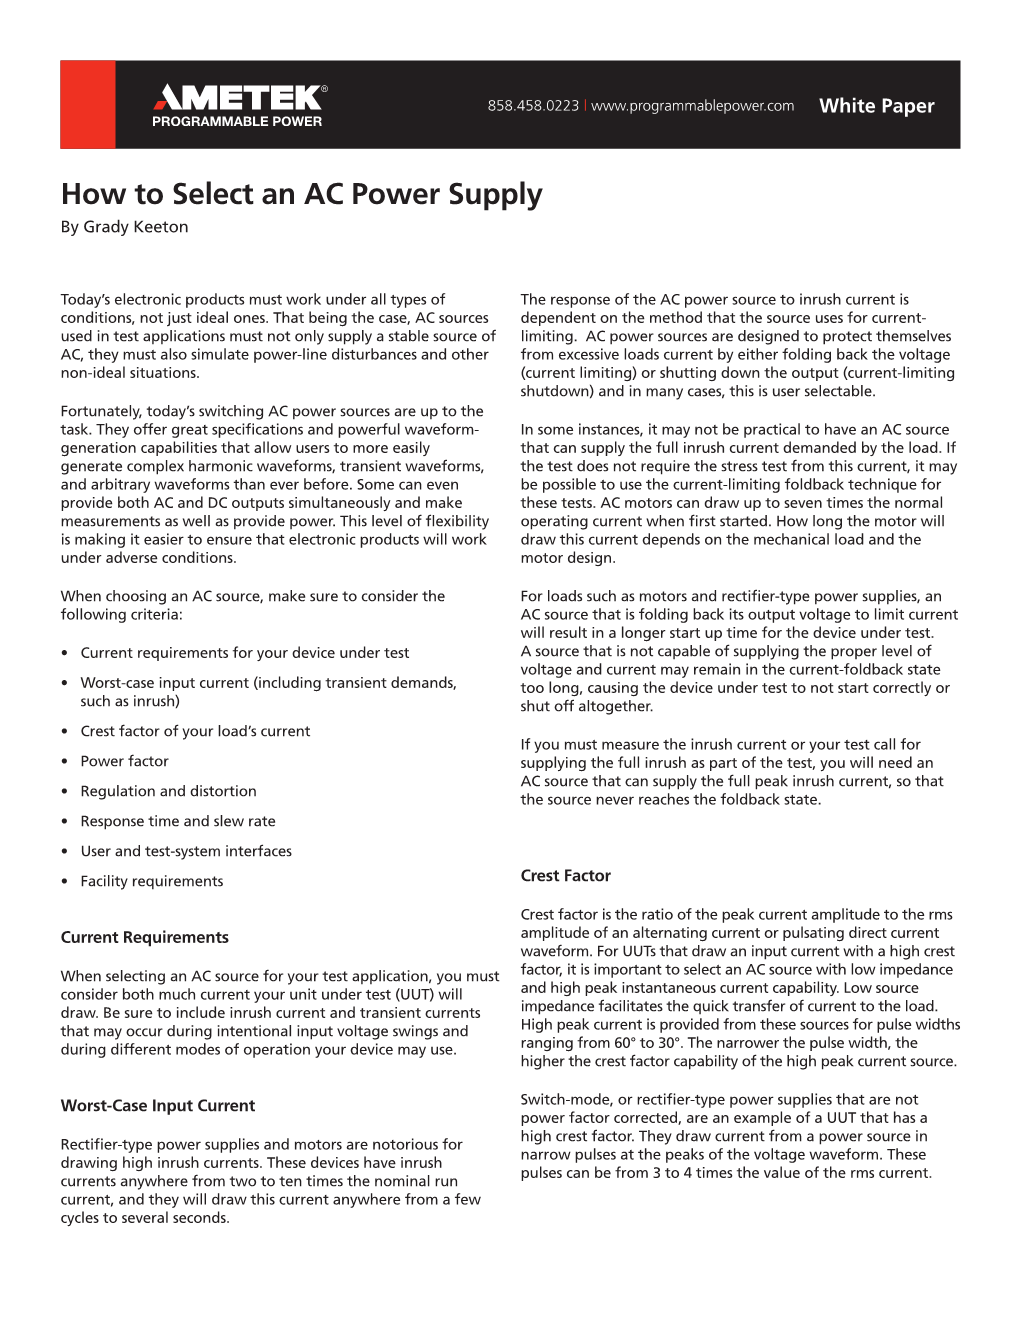 How to Select an AC Power Supply by Grady Keeton